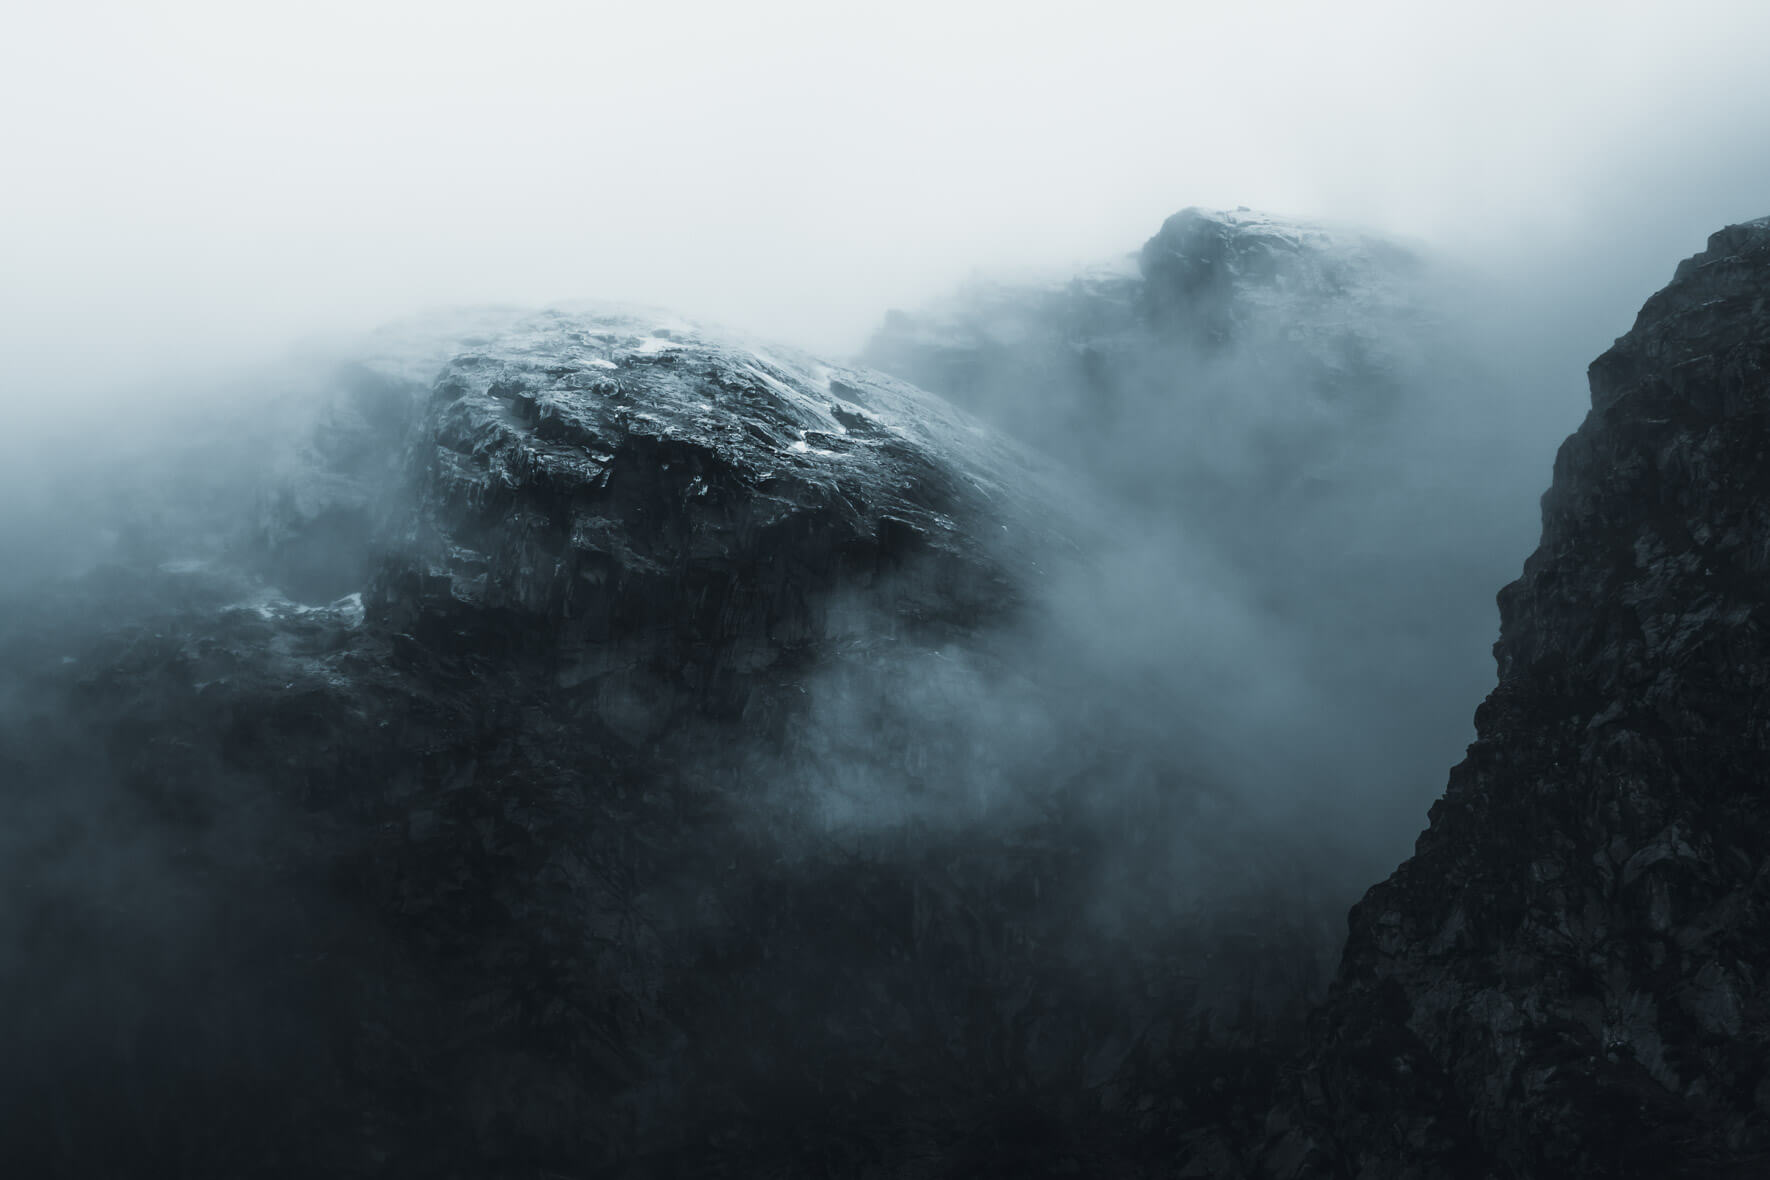 Dark and moody landscape photography by Northlandscapes - Jan Erik Waider